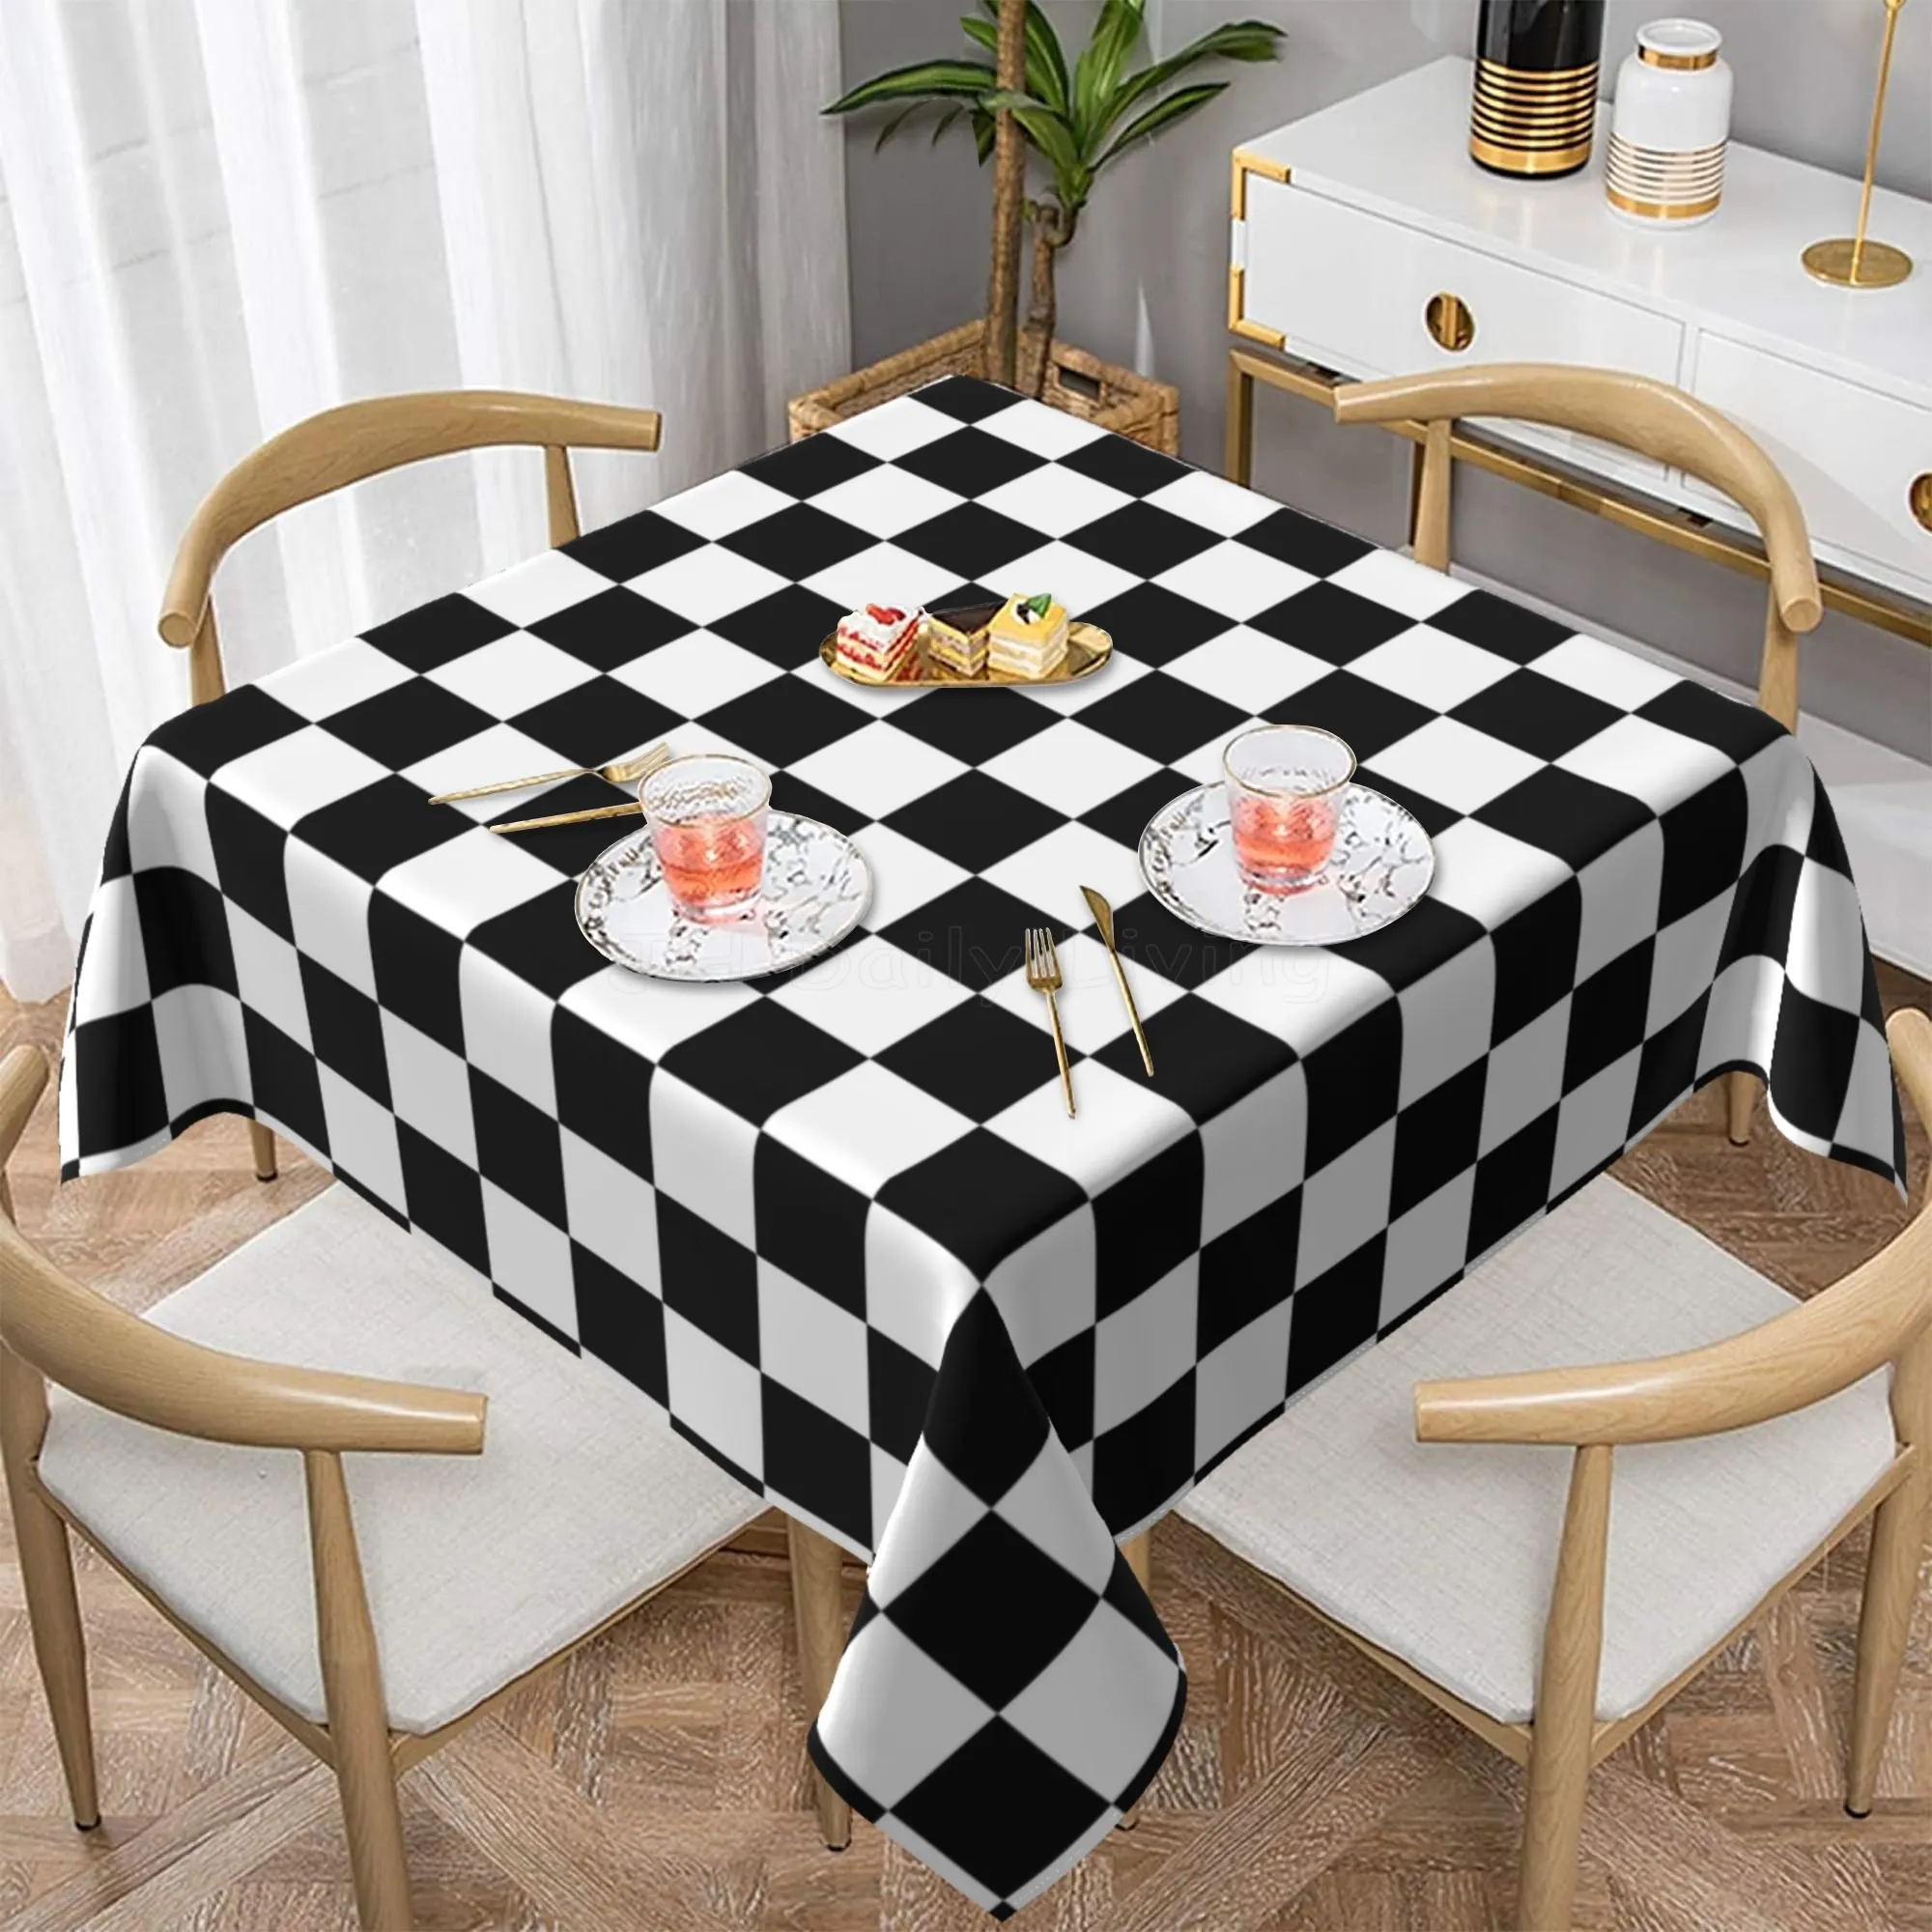 Racing Flags Black and White Grid Square Tablecloth Home Kitchen Decor Waterproof Table Cover for Outdoor Party Picnic Camping